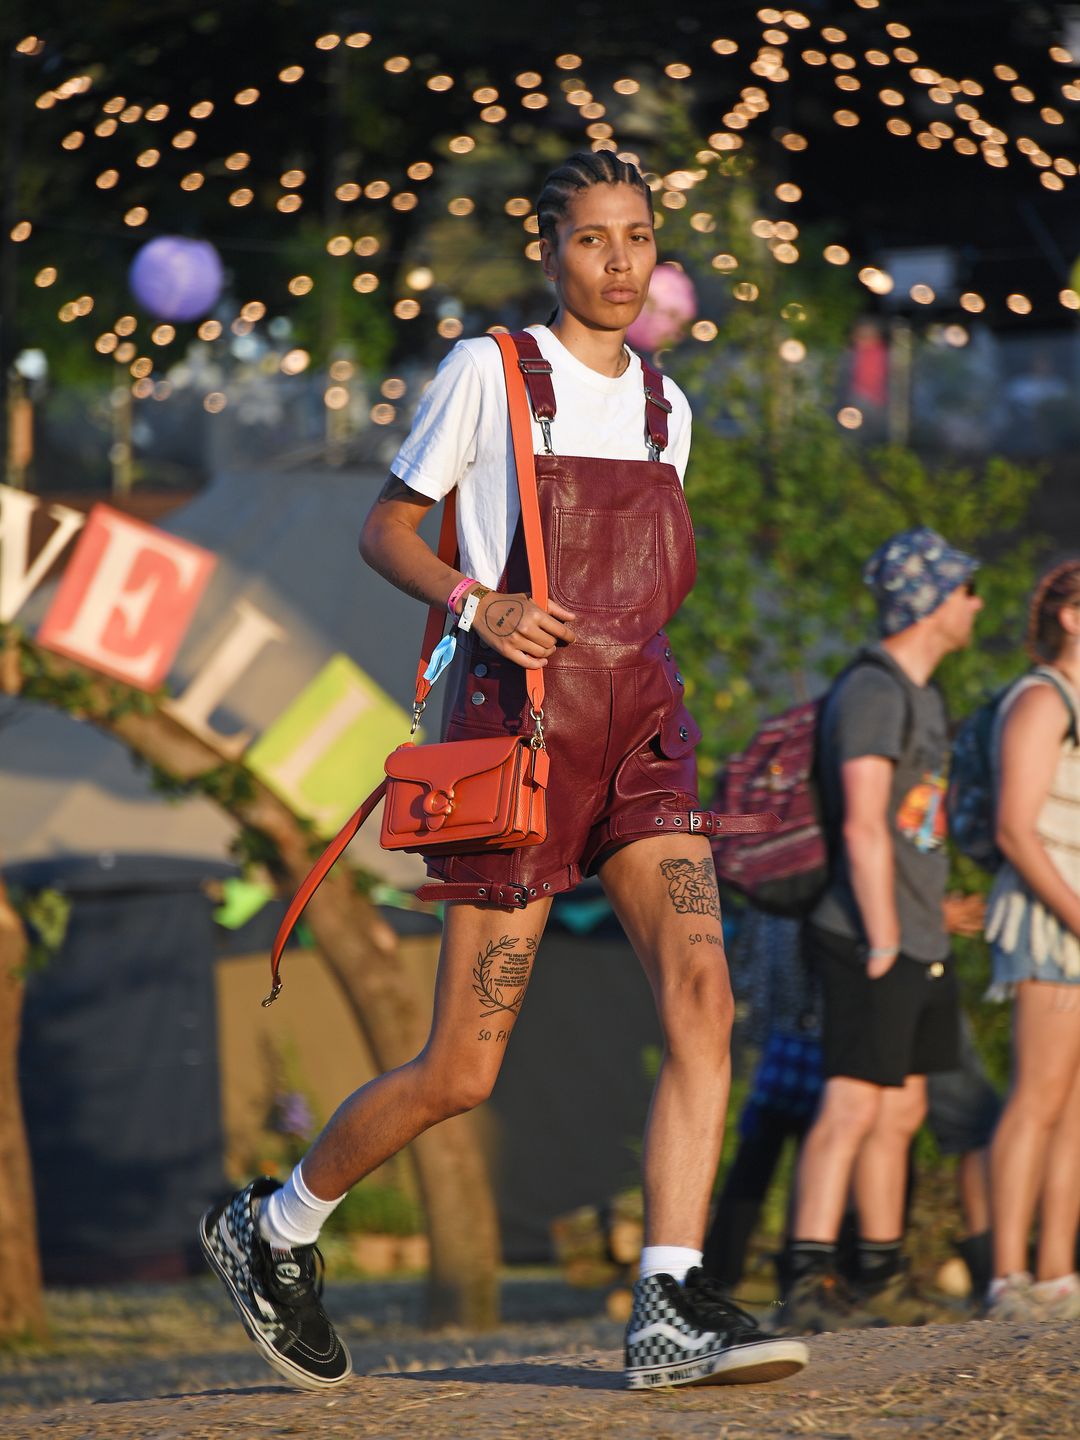 Model Kai-Isaiah Jamal attended day three of Glastonbury wearing maroon dungarees, white oversized t-shirt and a Coach bag.